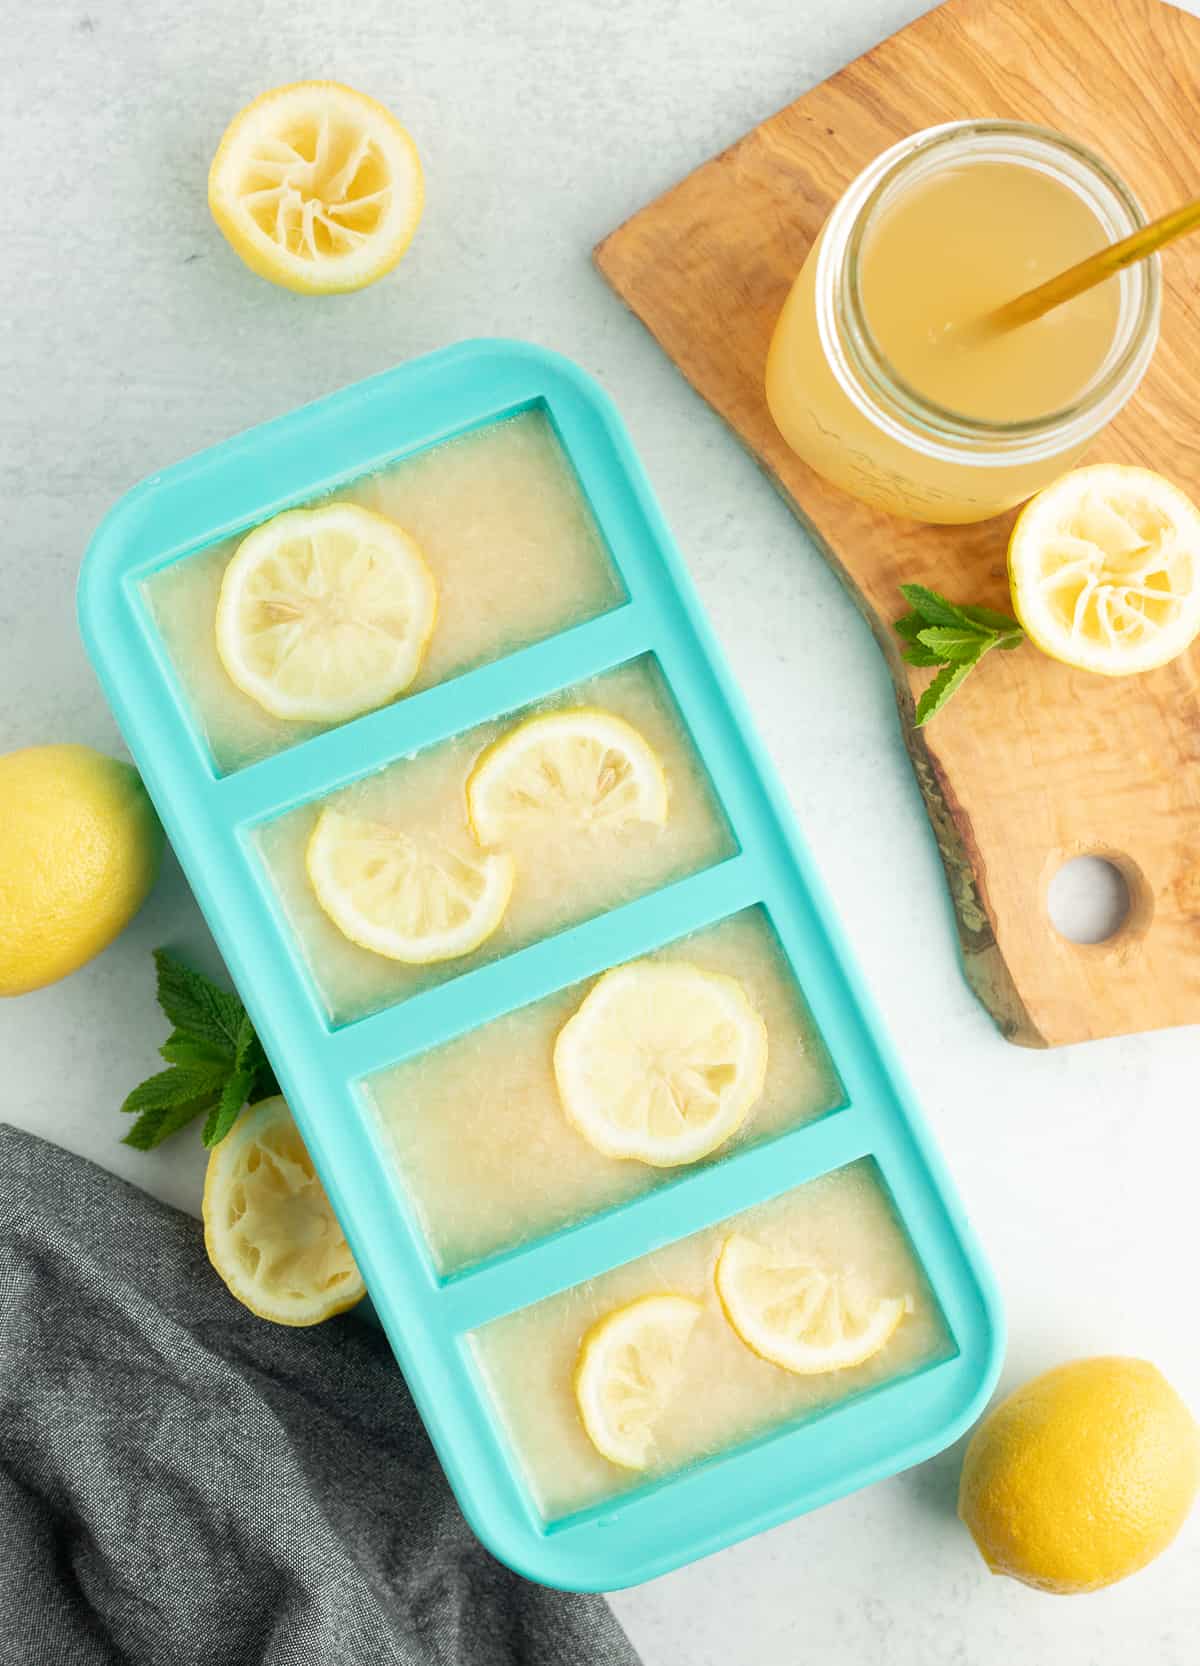 frozen blocks of lemonade concentrate with sliced lemons on top an a glass with a straw.